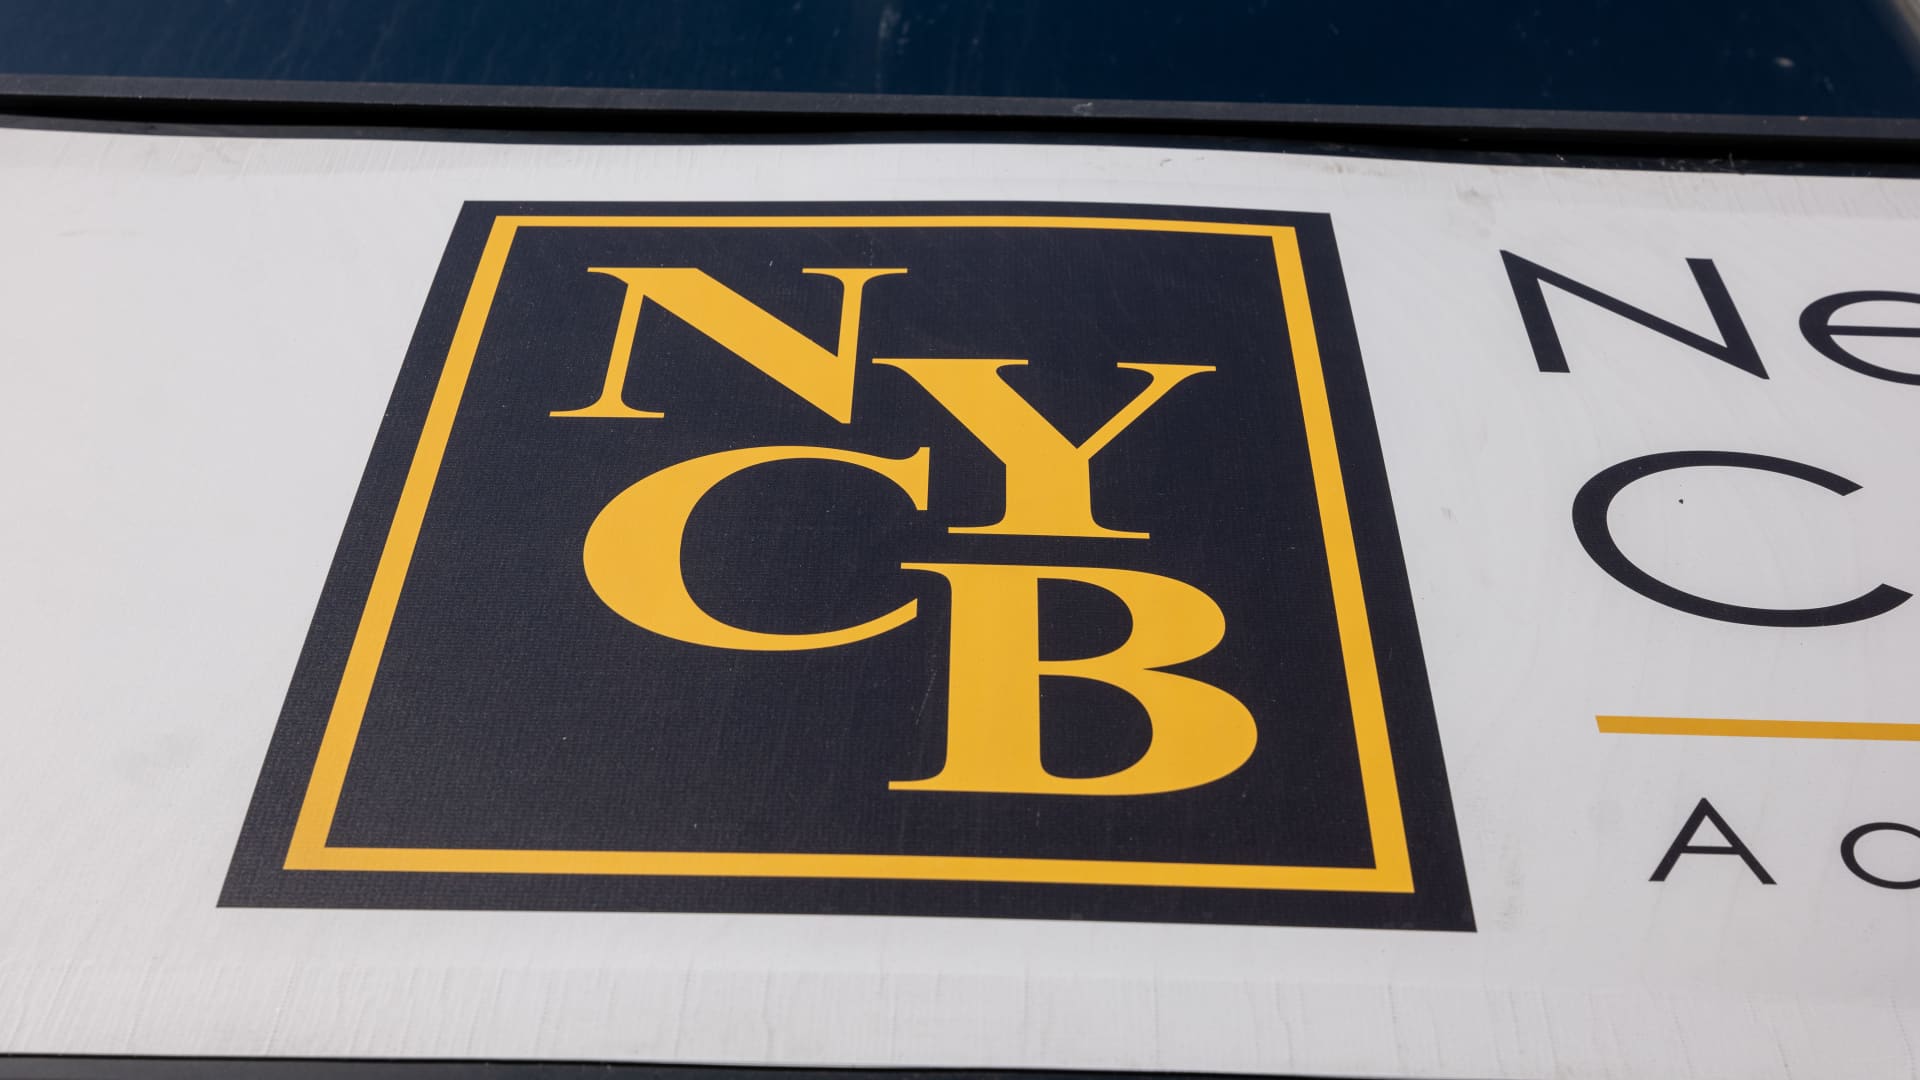 NYCB shares rise on deal to sell $5 billion mortgage warehouse loans to JPMorgan - CNBC